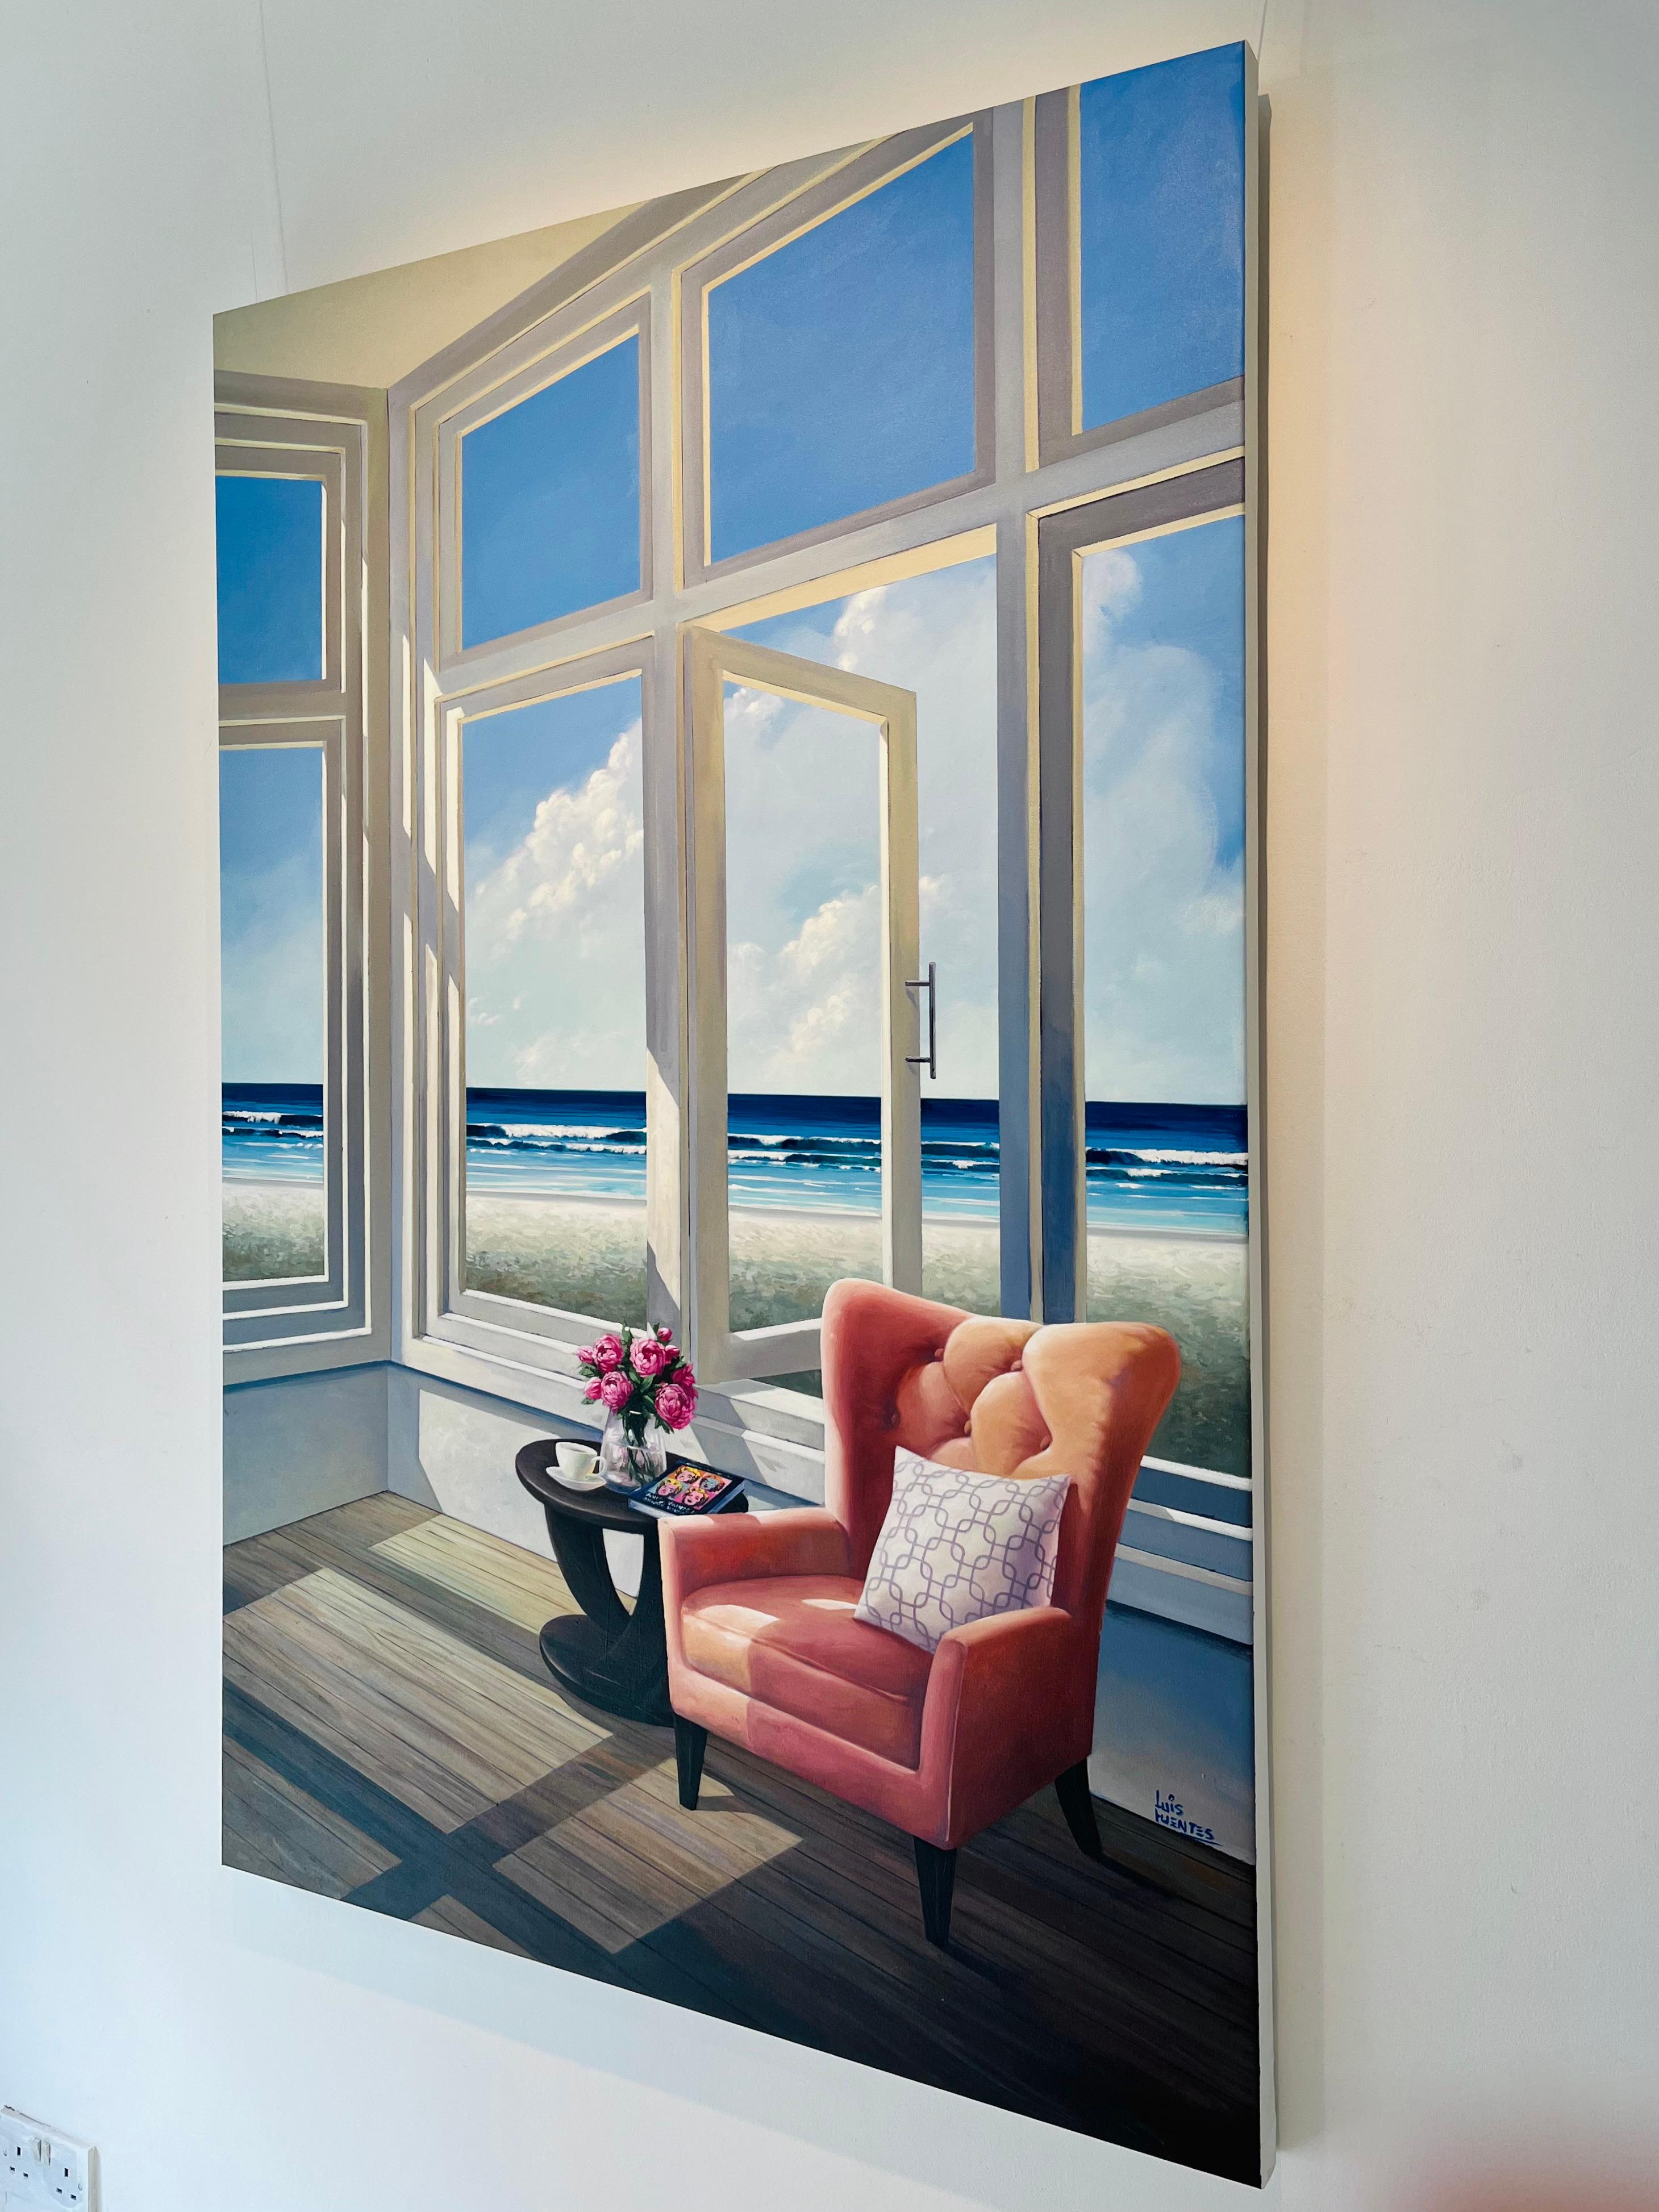 Beyond Tranquility-original still life-seascape oil painting-contemporary Art - Surrealist Painting by Luis Fuentes